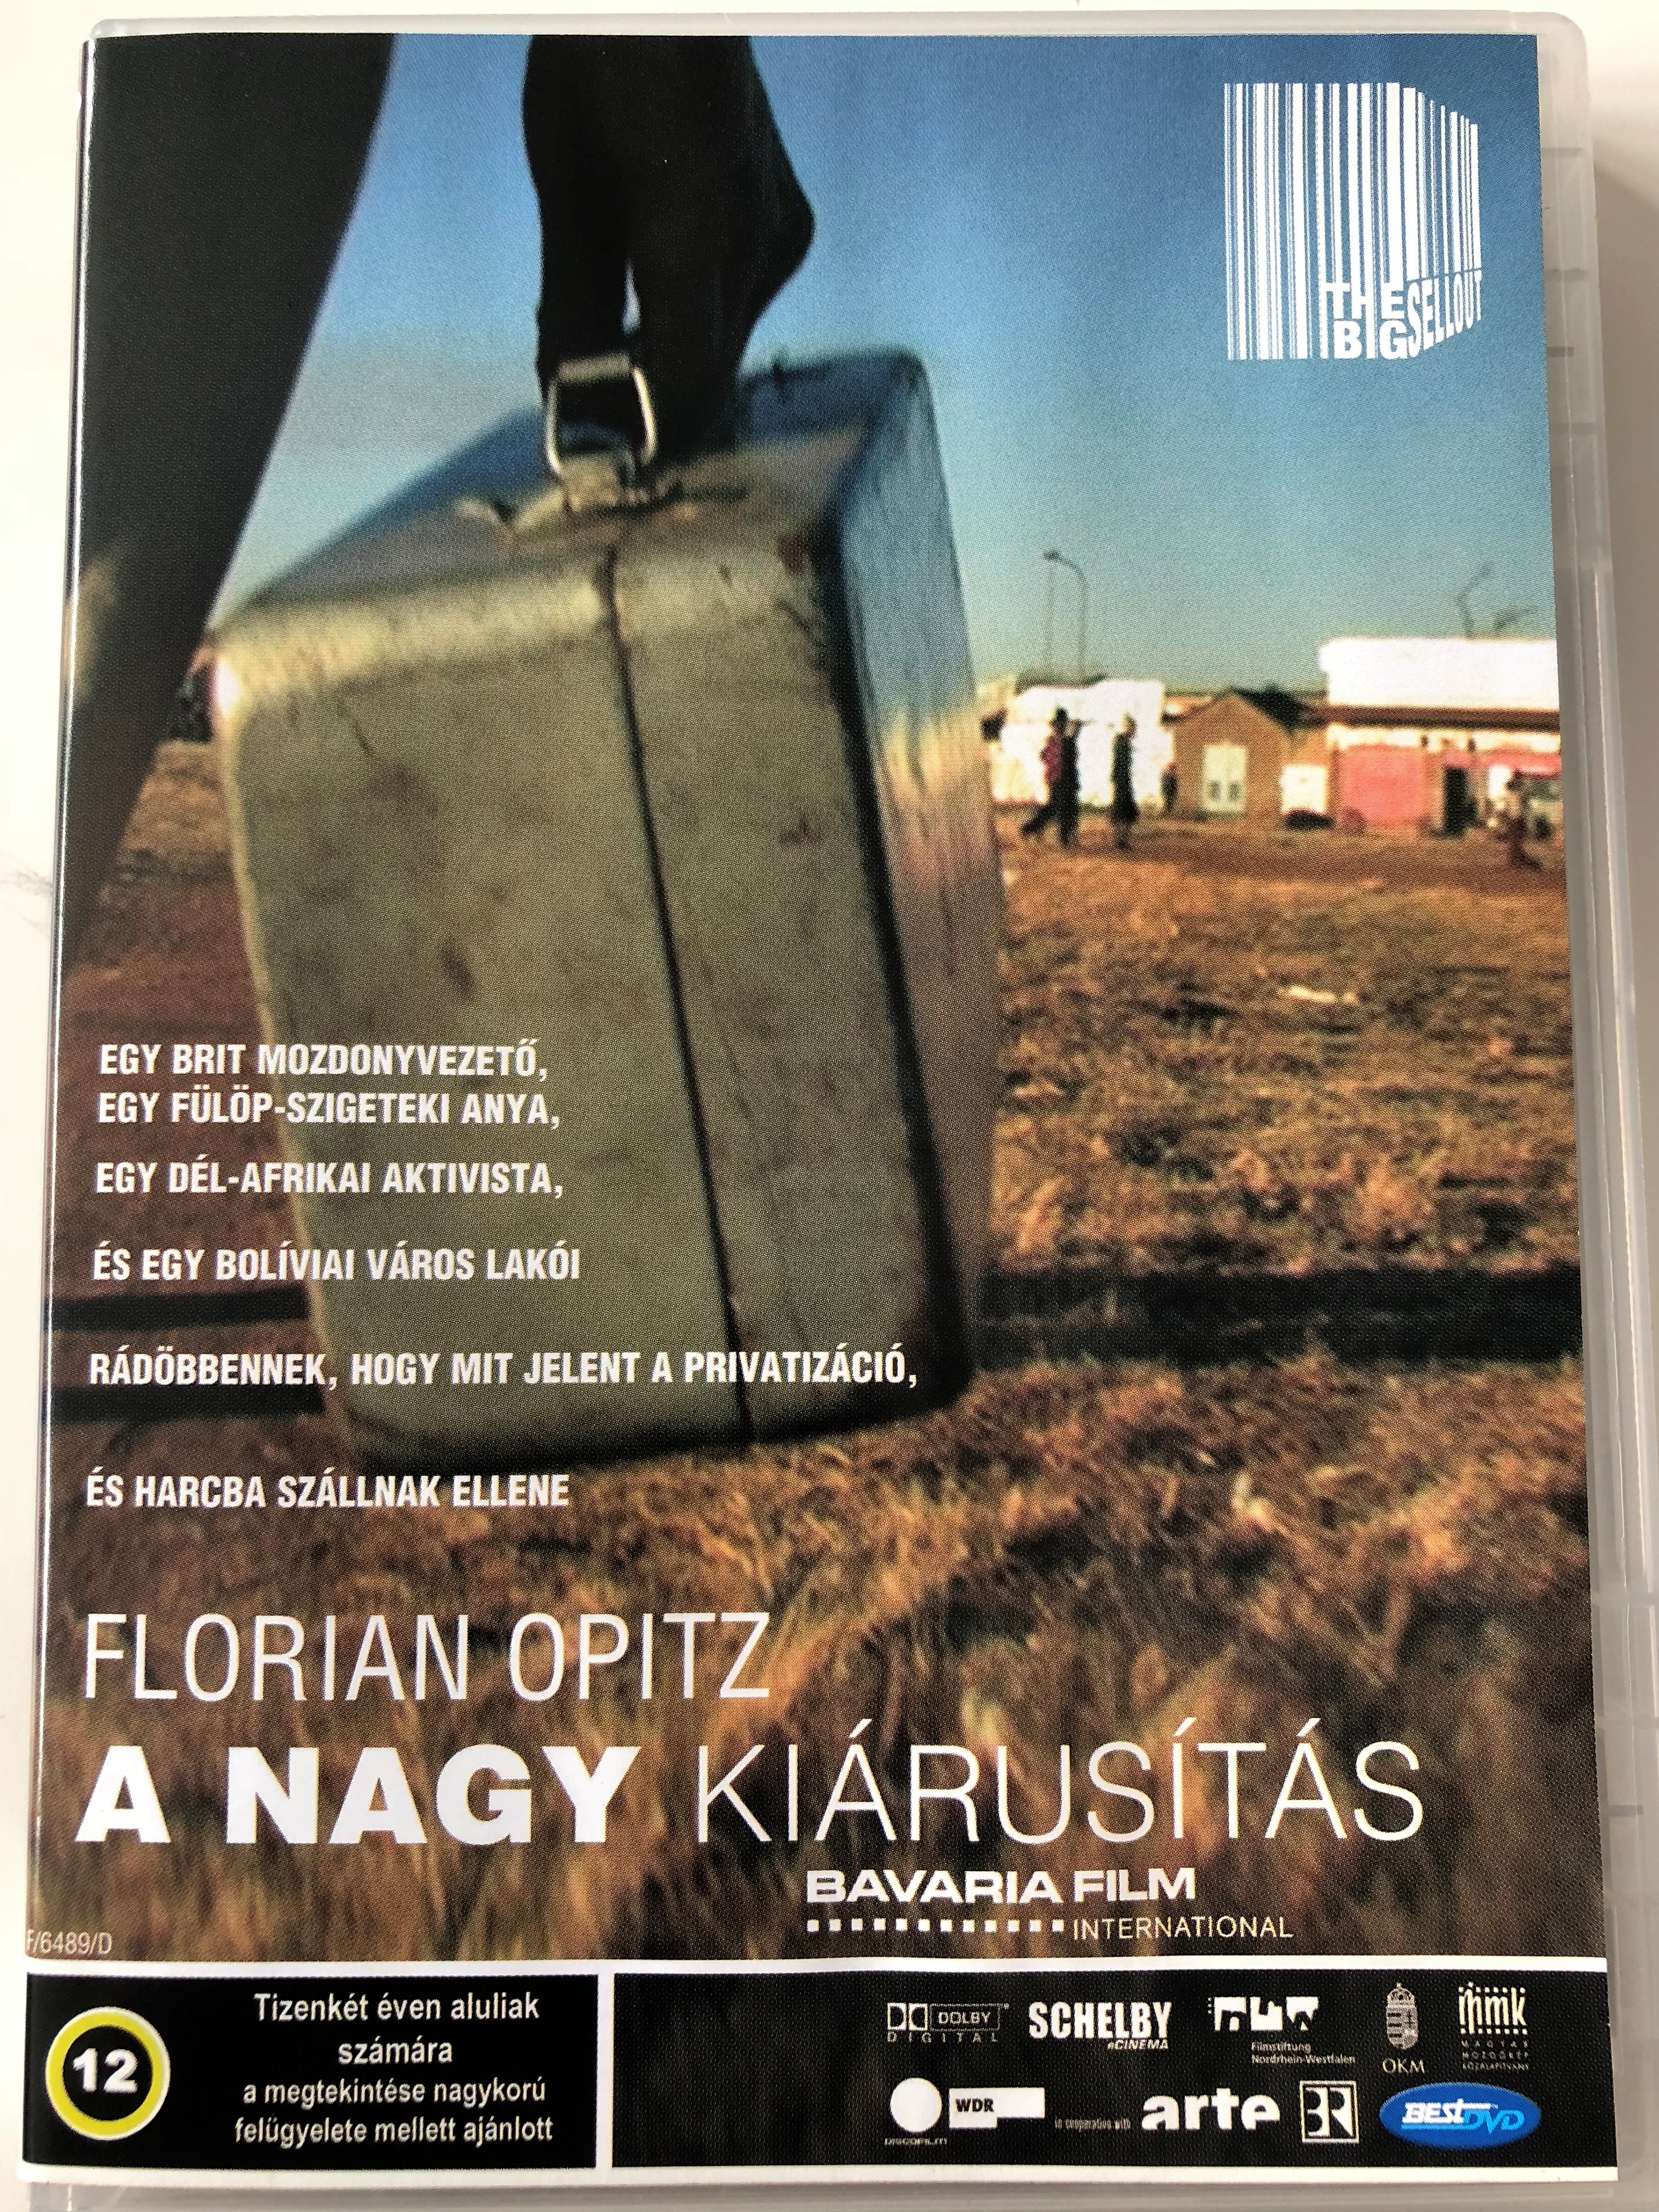 der-grosse-ausverkauf-the-big-sellout-dvd-2006-a-nagy-ki-rus-t-s-directed-by-florian-opitz-documentary-about-the-cruel-reality-of-the-privatized-and-globalized-world-1-.jpg